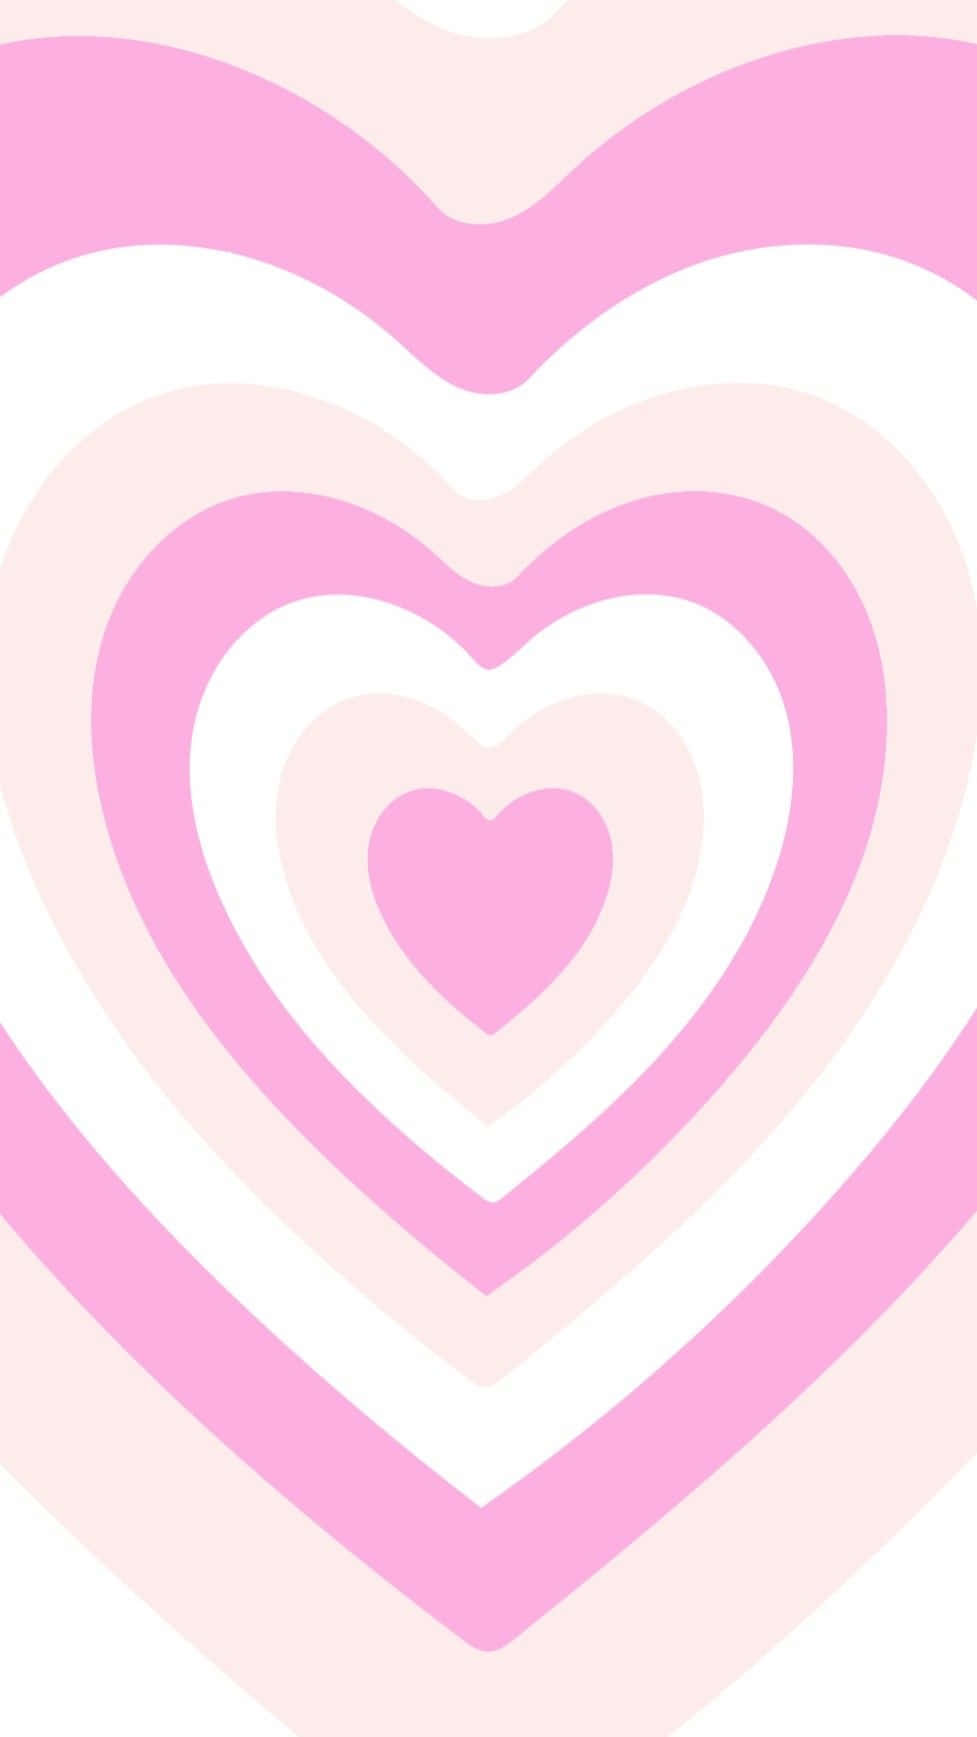 Pink Heart Concentric Layers Aesthetic.jpg Wallpaper